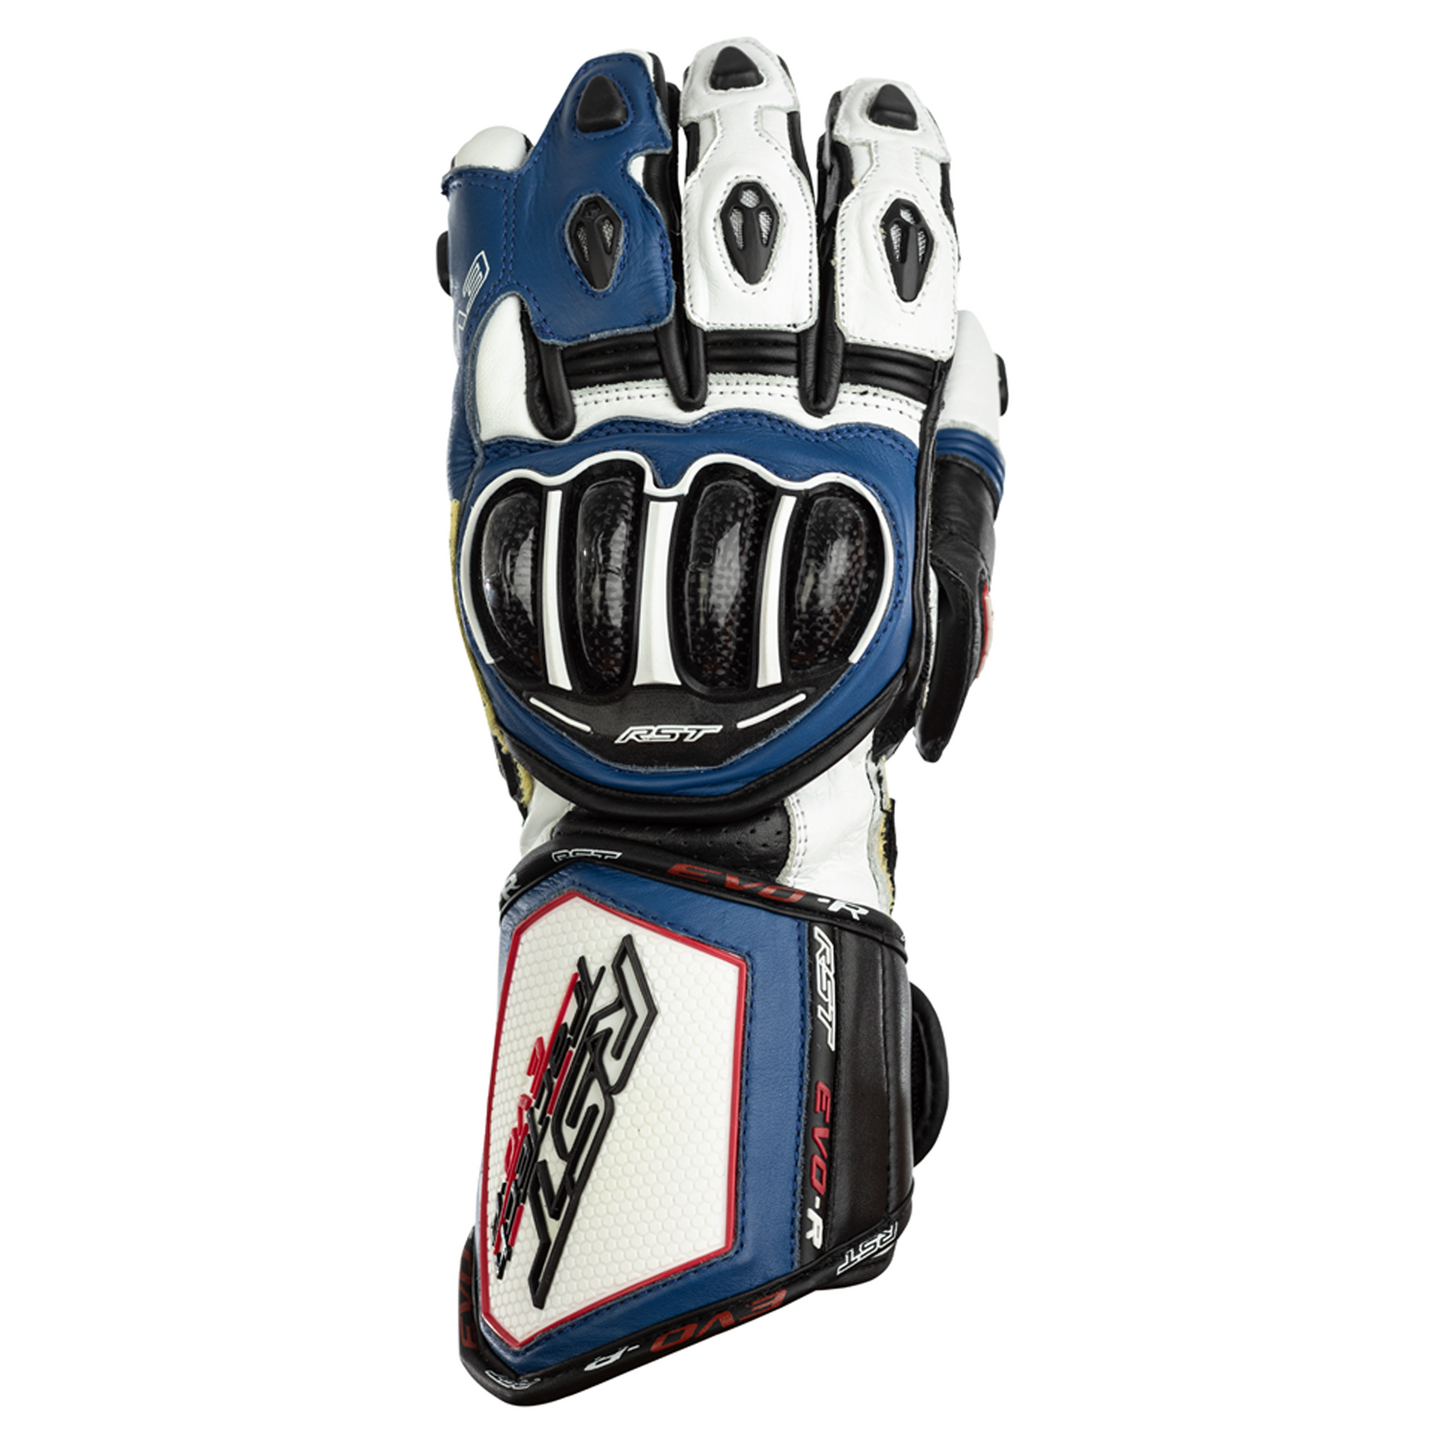 RST Tractech Evo R Riding Gloves - CE Approved - Blue